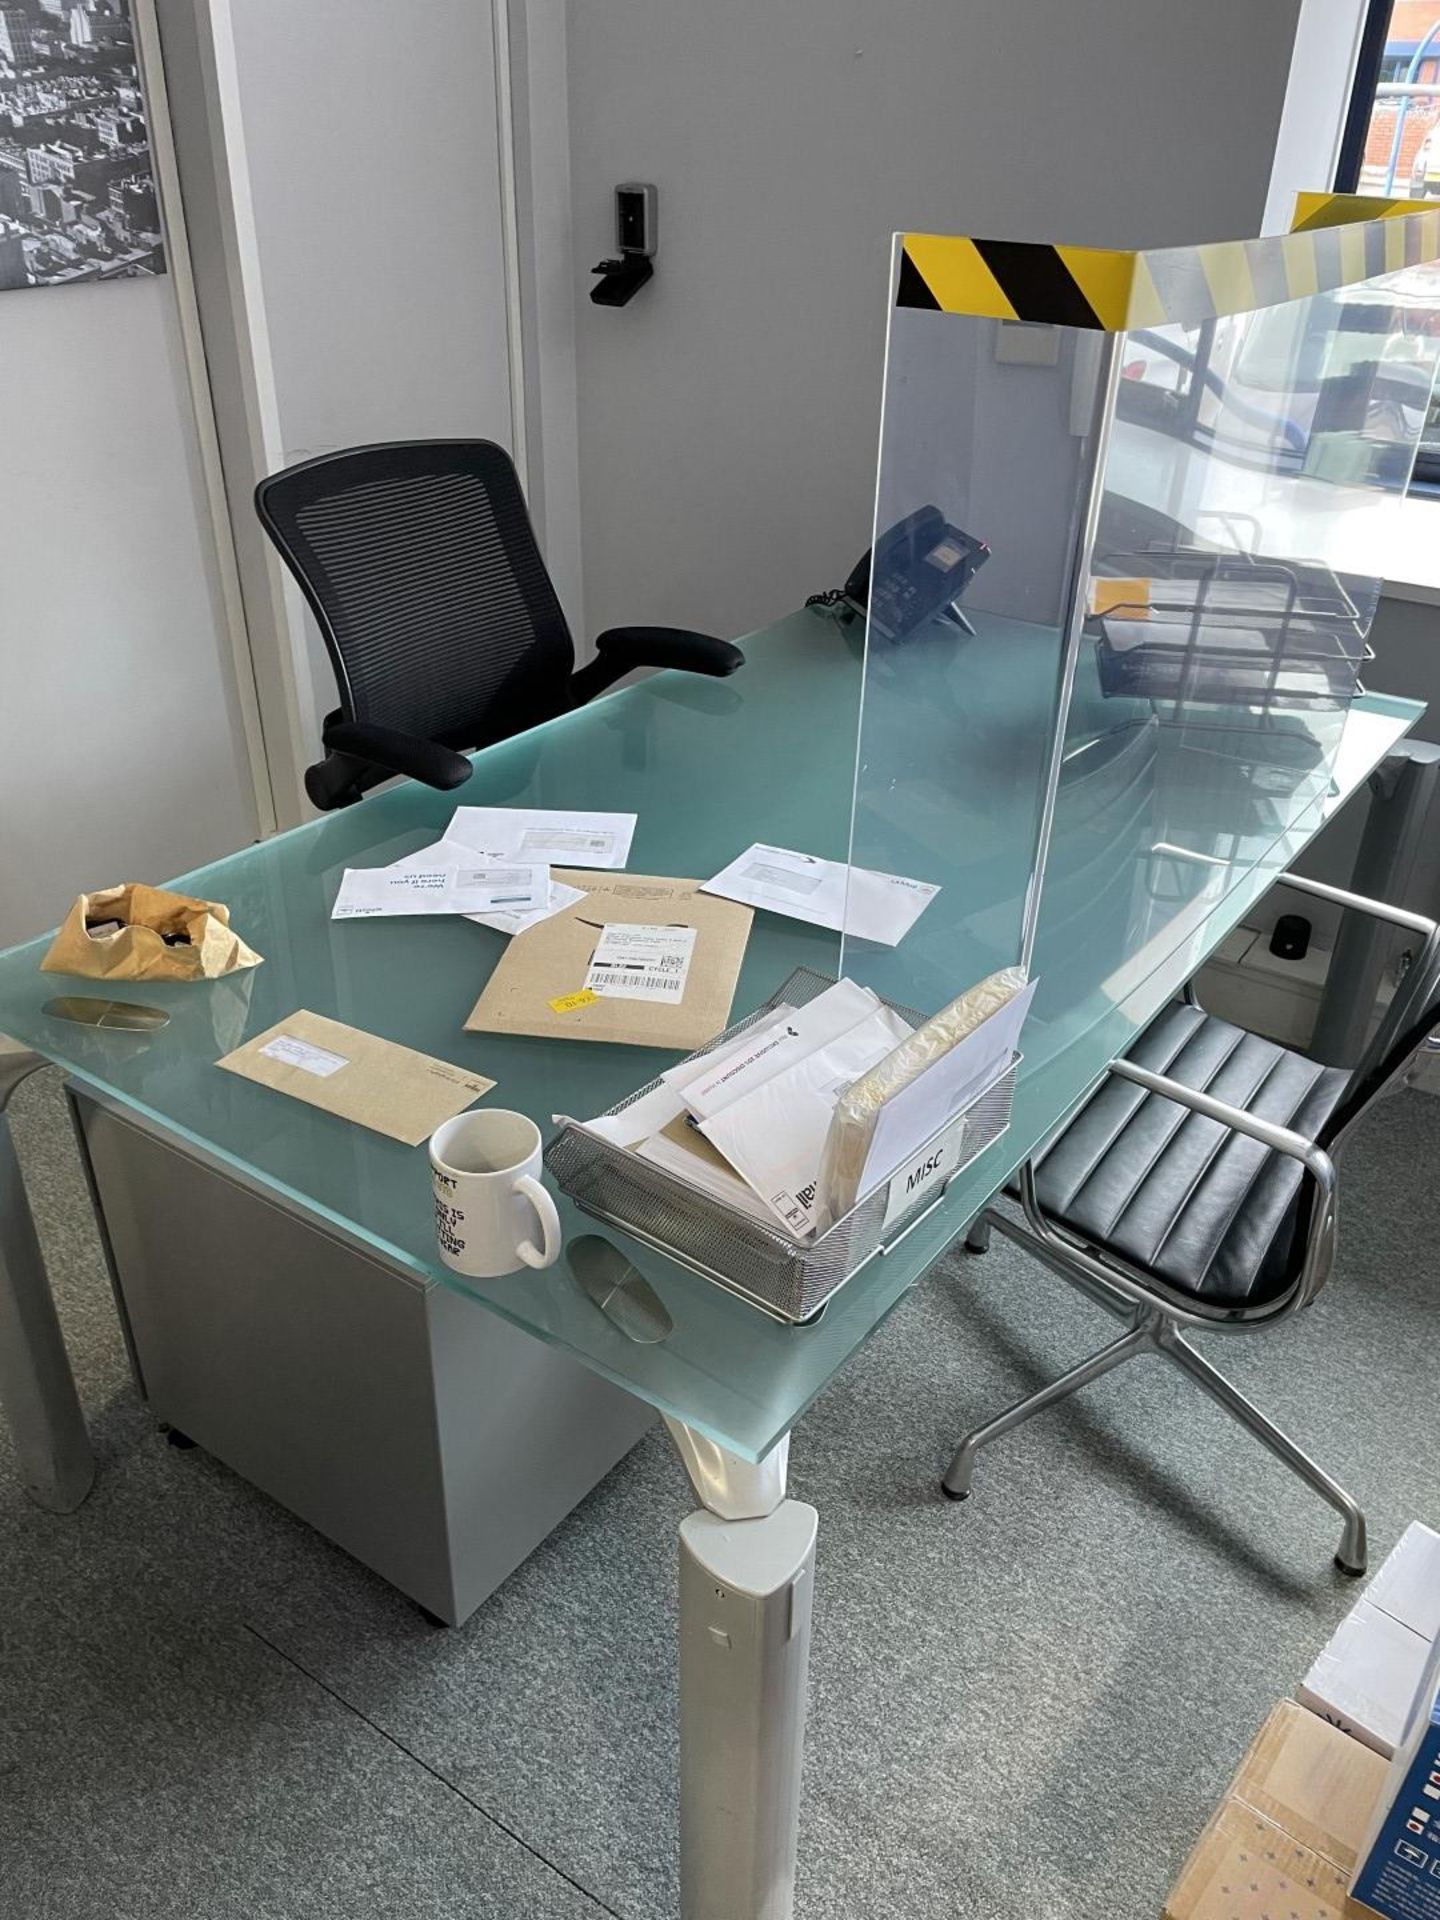 1 x Large BABIN Branded Office Table Fitted Glass Top With Metal Base  - Dimensions: H74 x W180 x